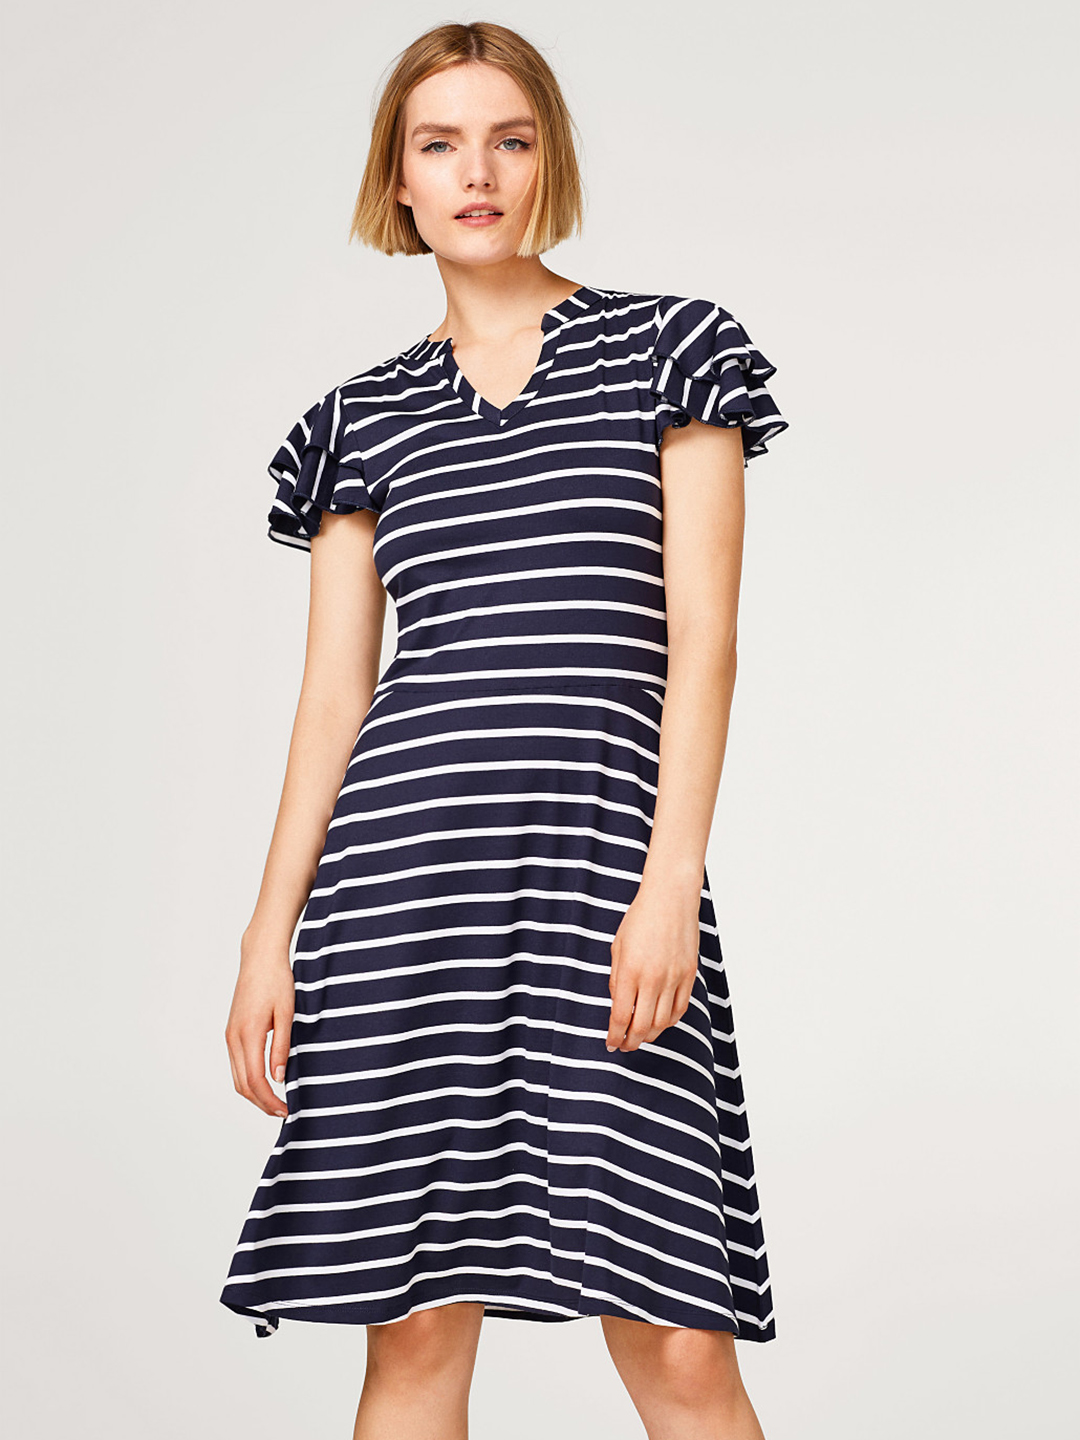 ESPRIT Women Navy Blue & White Striped Fit and Flare Dress Price in India